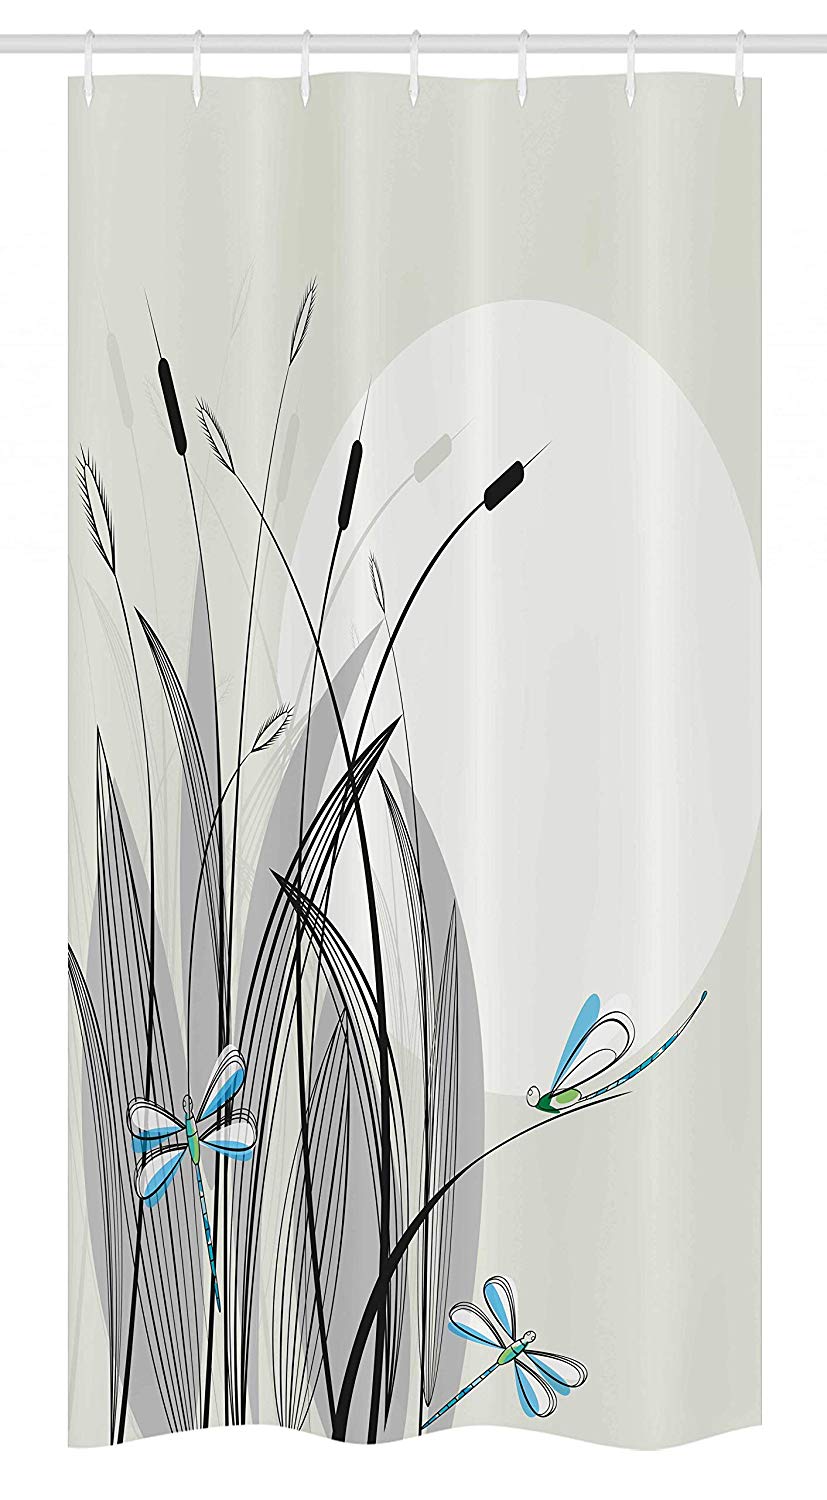 Ambesonne Dragonfly Stall Shower Curtain, Dragonflies on Flowers and Branches Flourishing Nature Spring Time Predator Print, Fabric Bathroom Decor Set with Hooks, 36